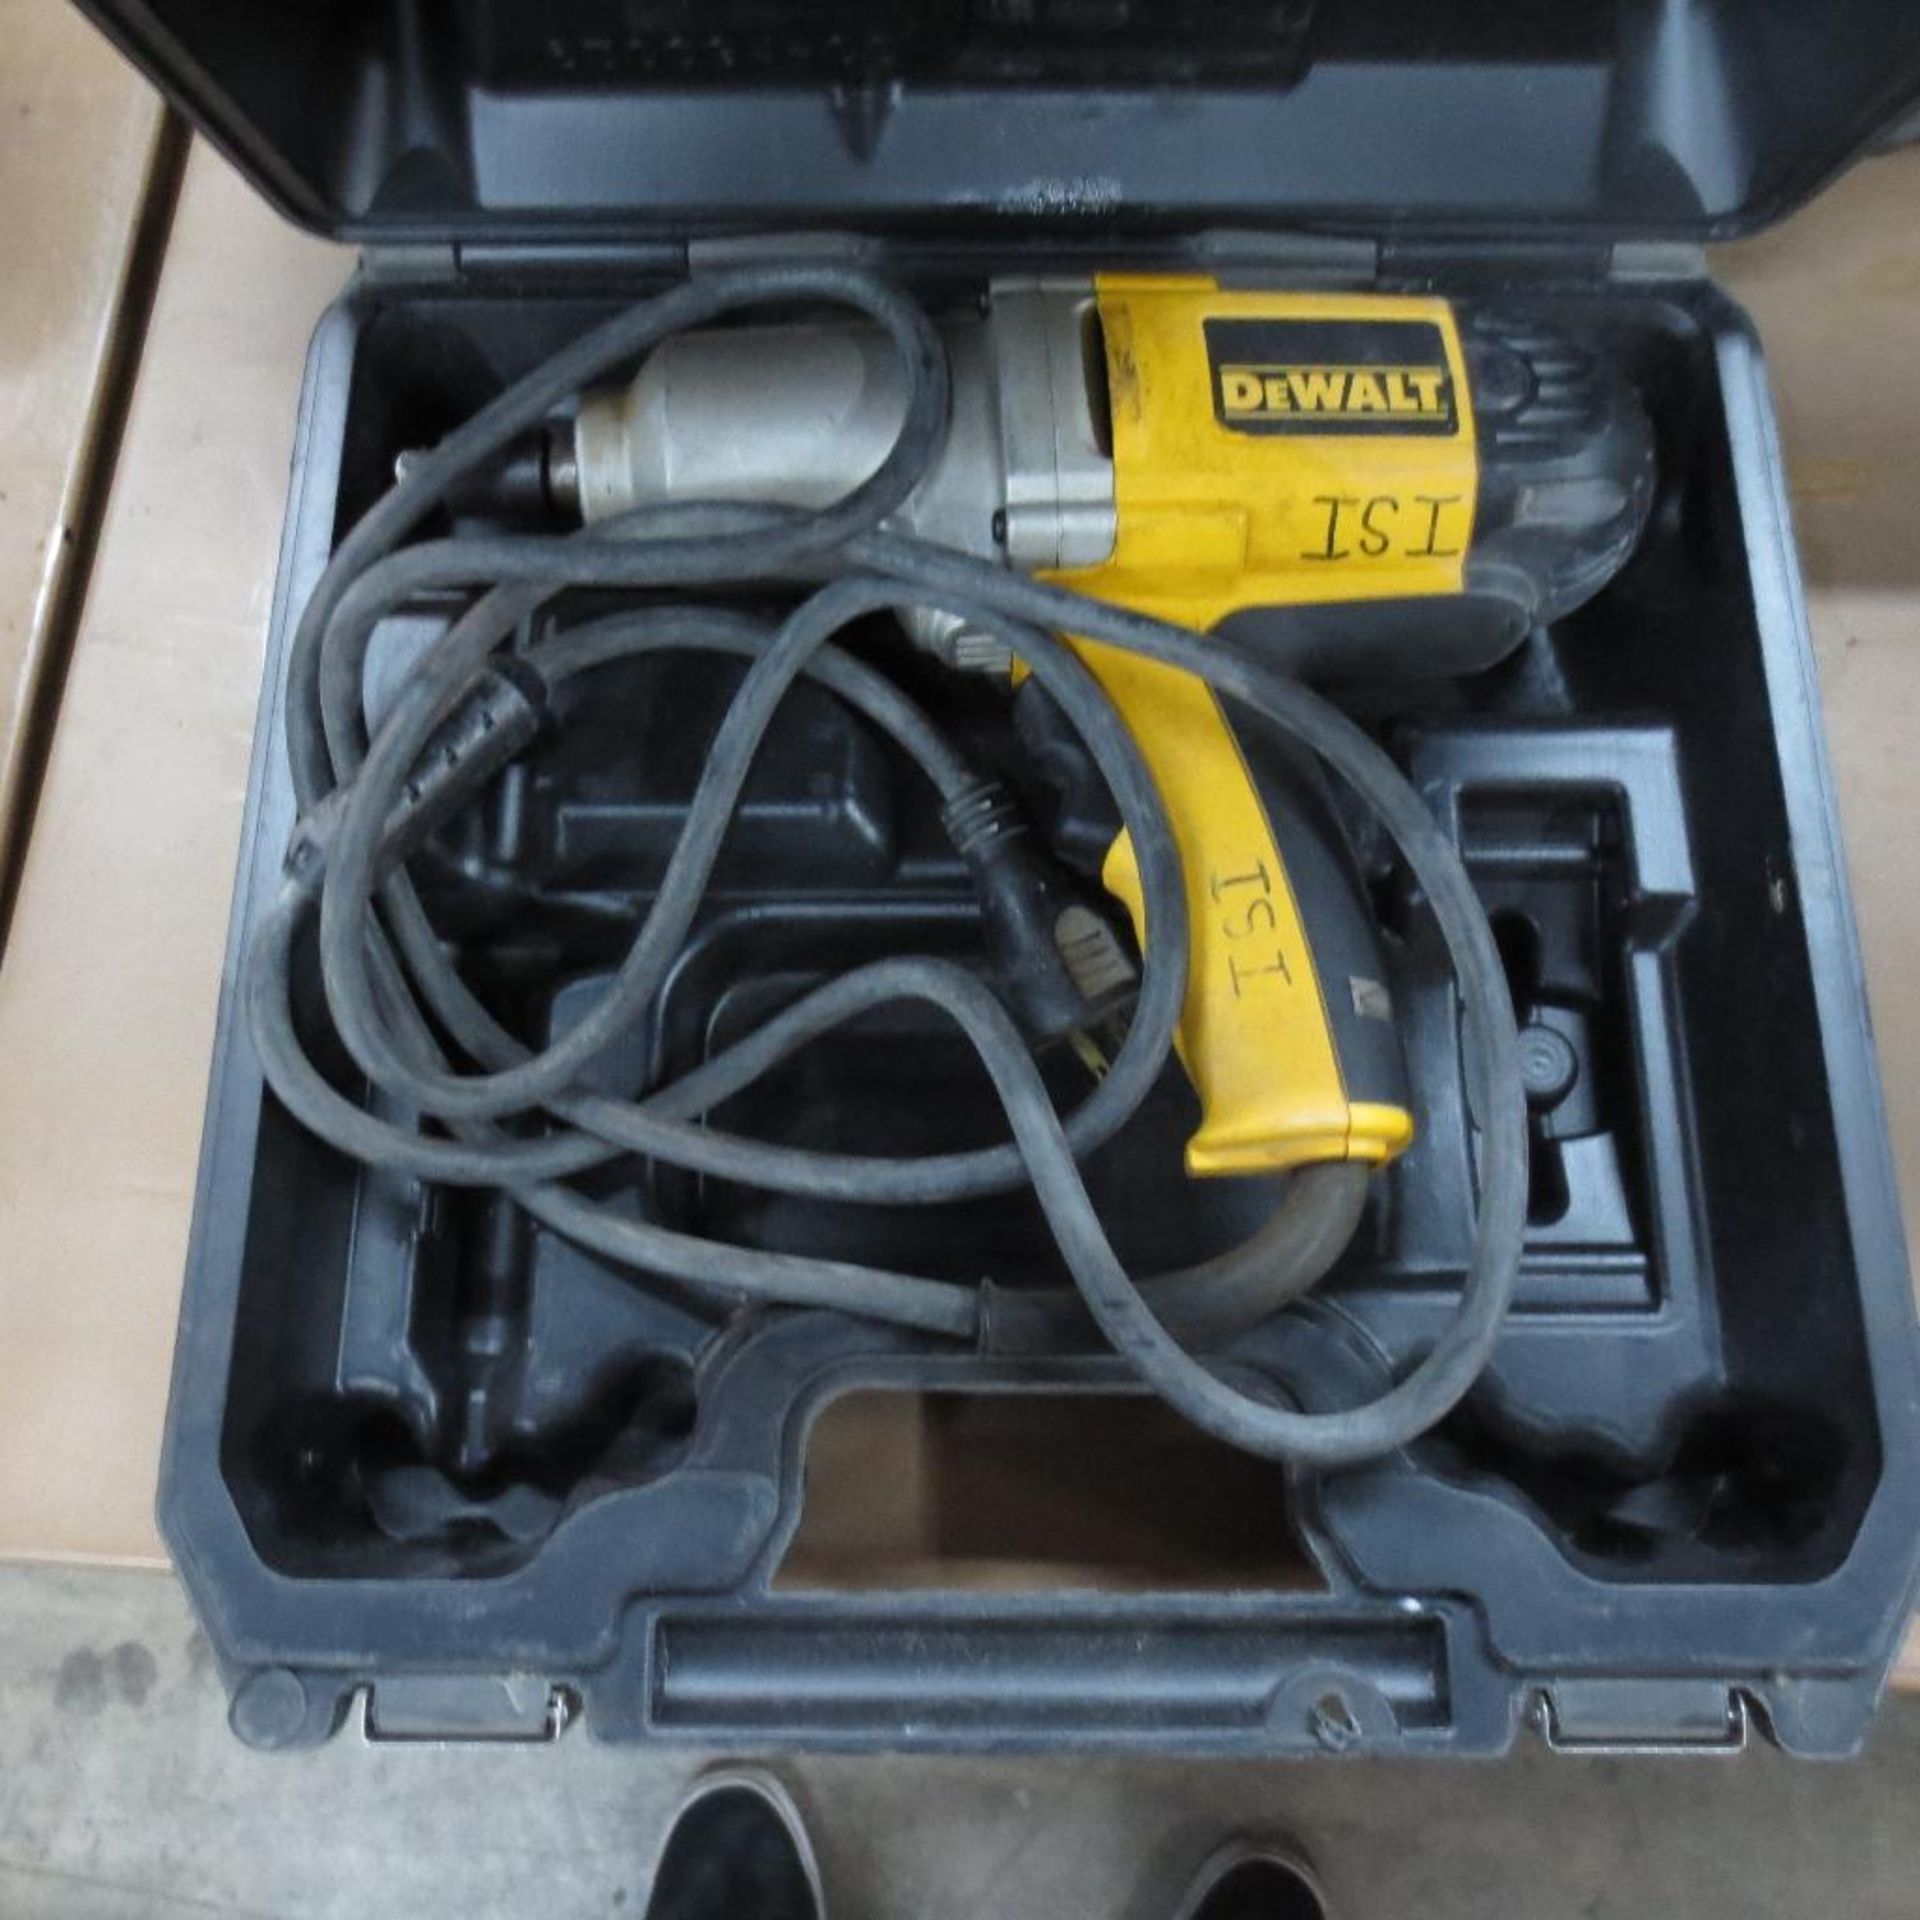 Dewalt Impact Wrench and (2) Kobalt Impact Wrench - Image 3 of 3